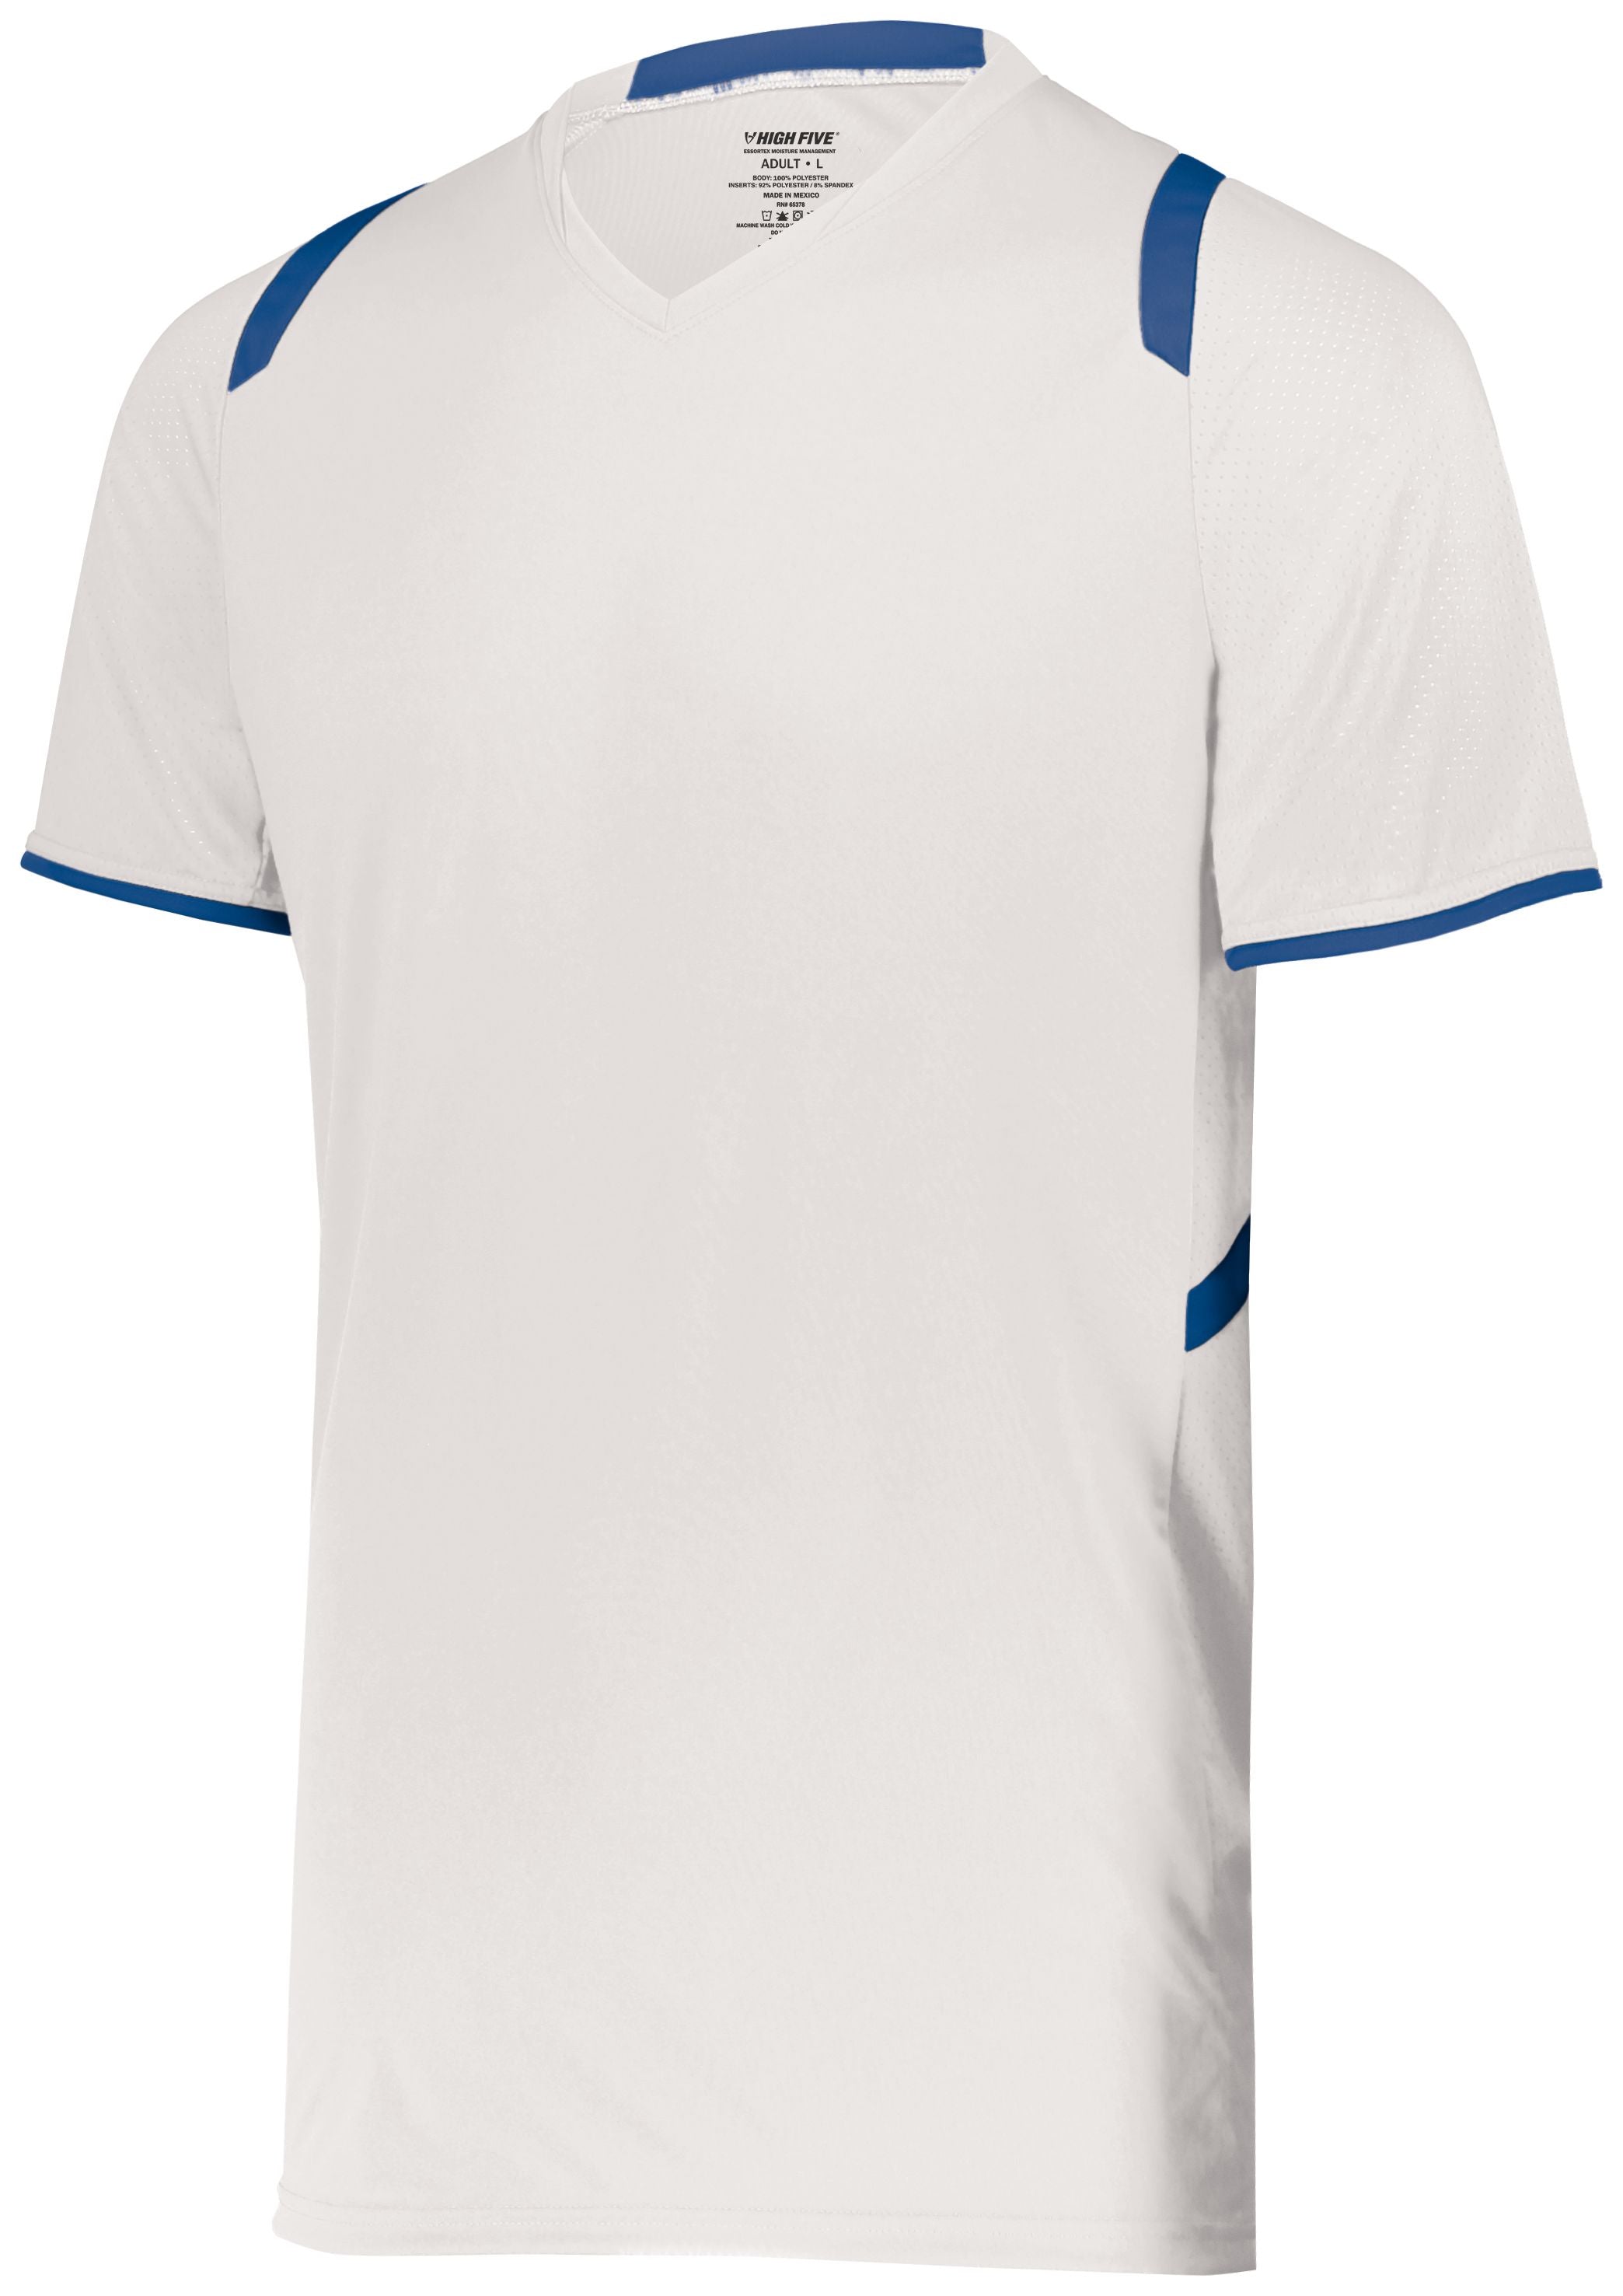 Youth Millennium Soccer Jersey 322961